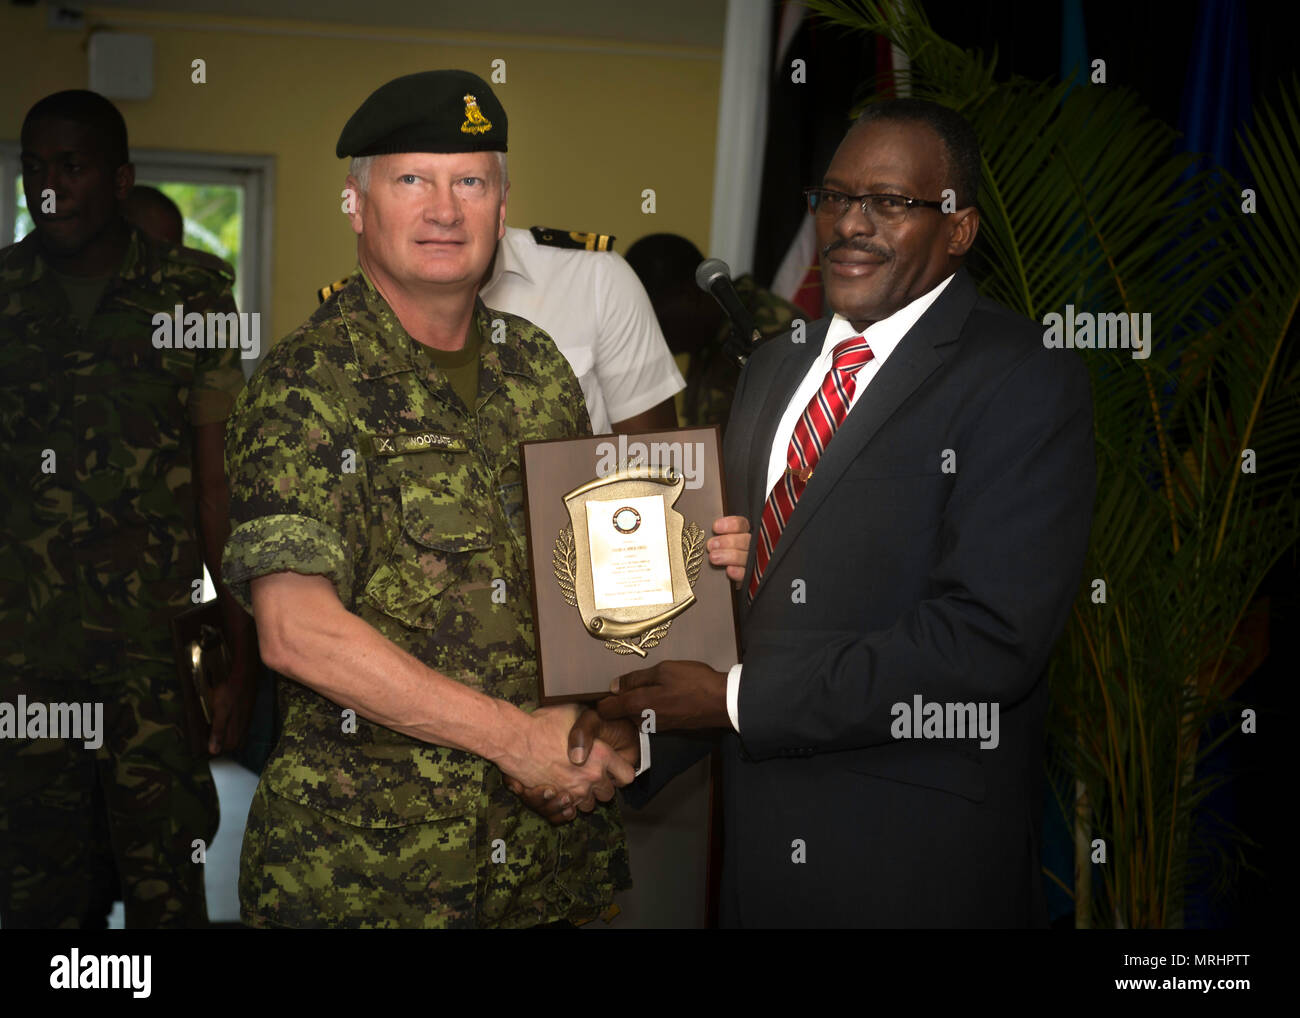 PORT OF SPAIN, Trinidad - Lieutenant-Colonel John Woodgate, Commanding Officer of 1st Field Artillery Regiment, receives a plaque on behalf of the Canadian Armed Forces during Exercise TRADEWINDS 17 closing ceremony in Chaguaramas, Trinidad and Tobago on June 17, 2017. (Canadian Forces Joint Imagery Centre photo by Avr Desiree T. Bourdon) Stock Photo